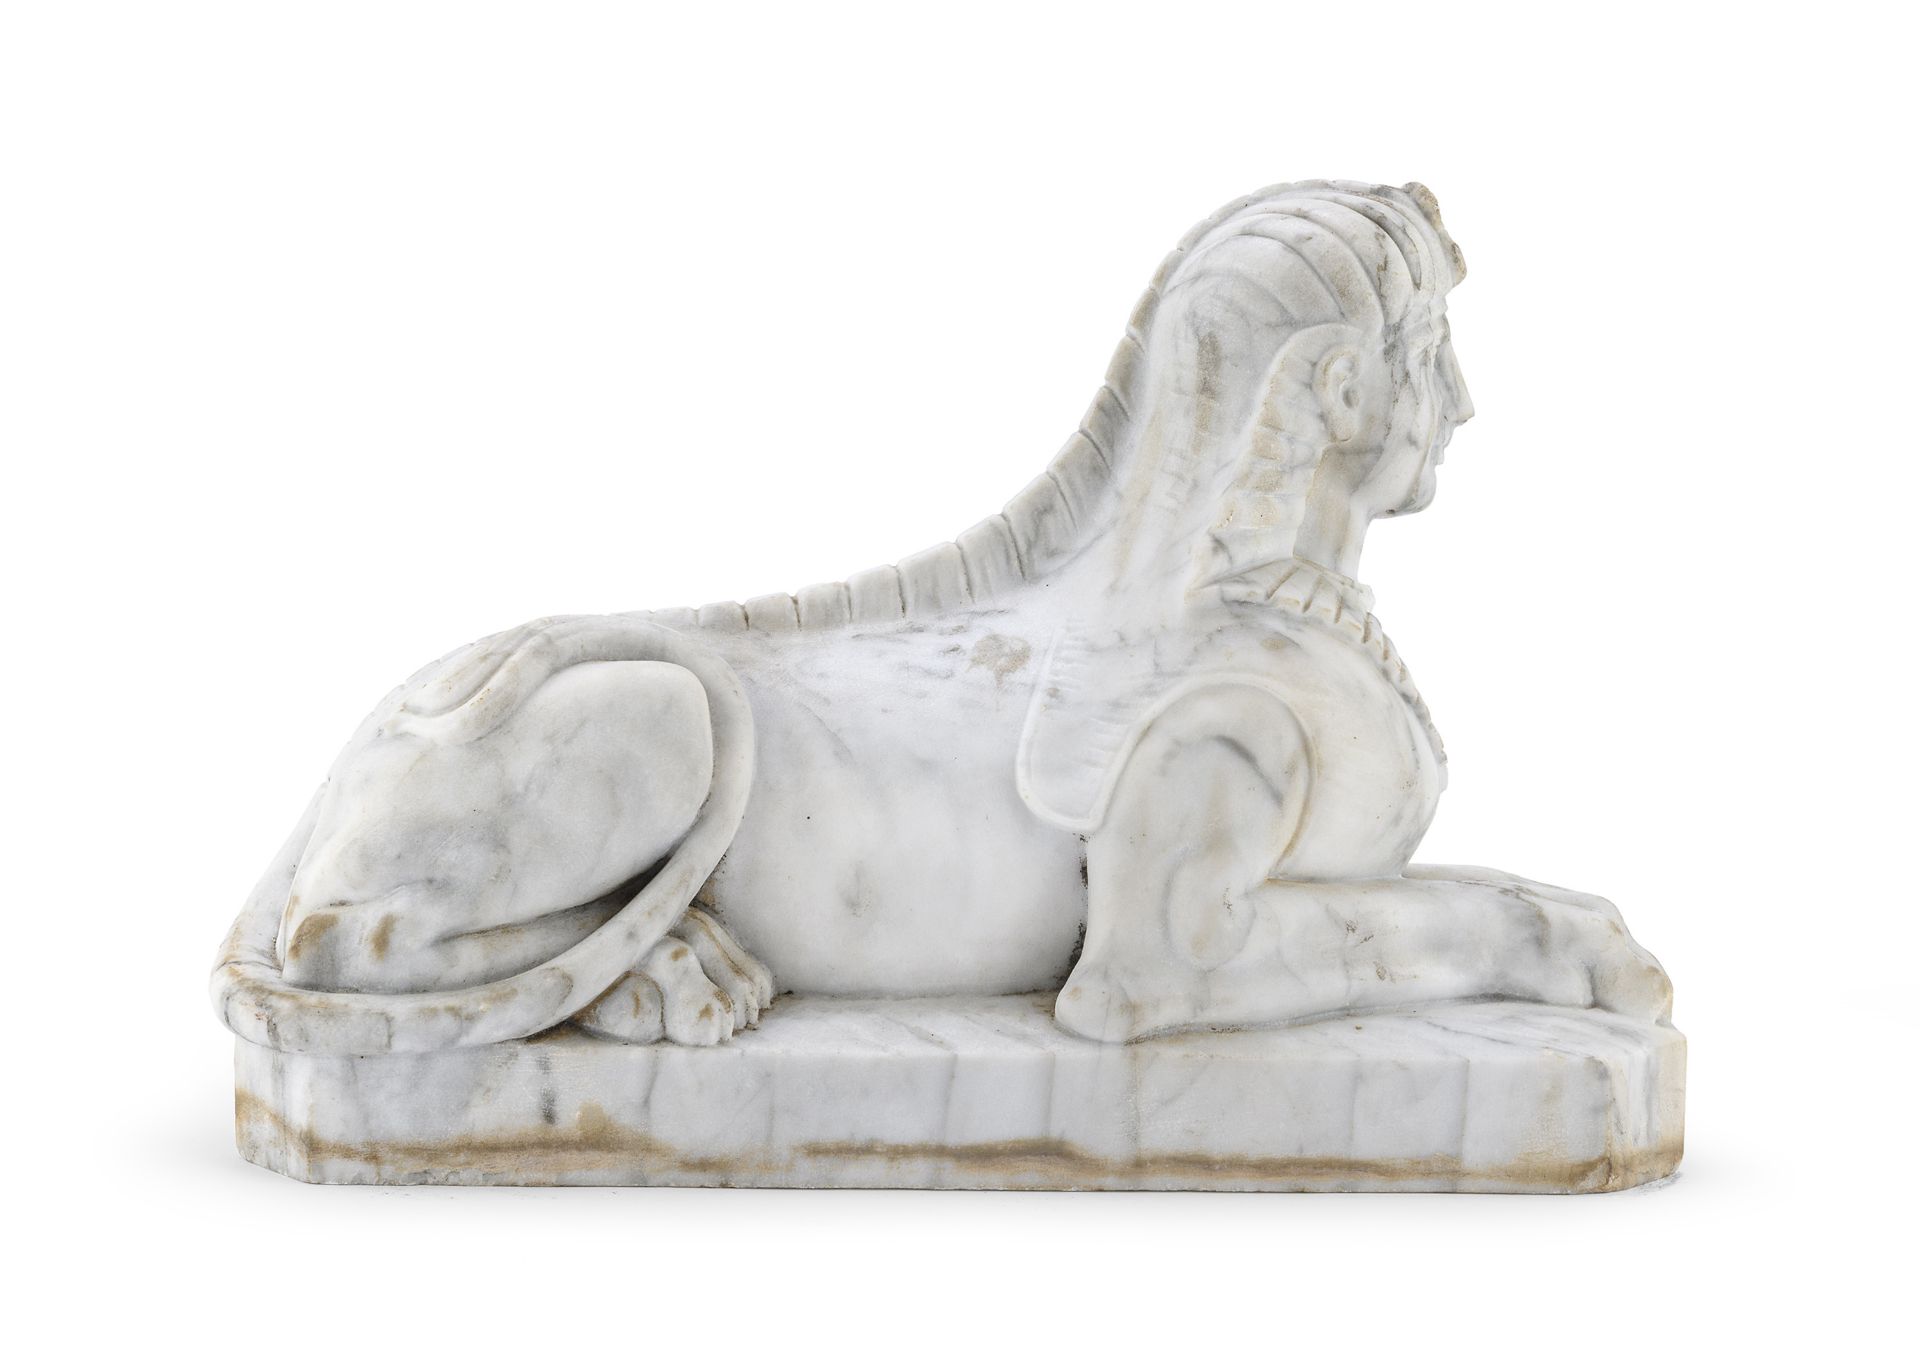 NEOCLASSICAL MARBLE SCULPTURE OF THE SPHINX EARLY 19TH CENTURY